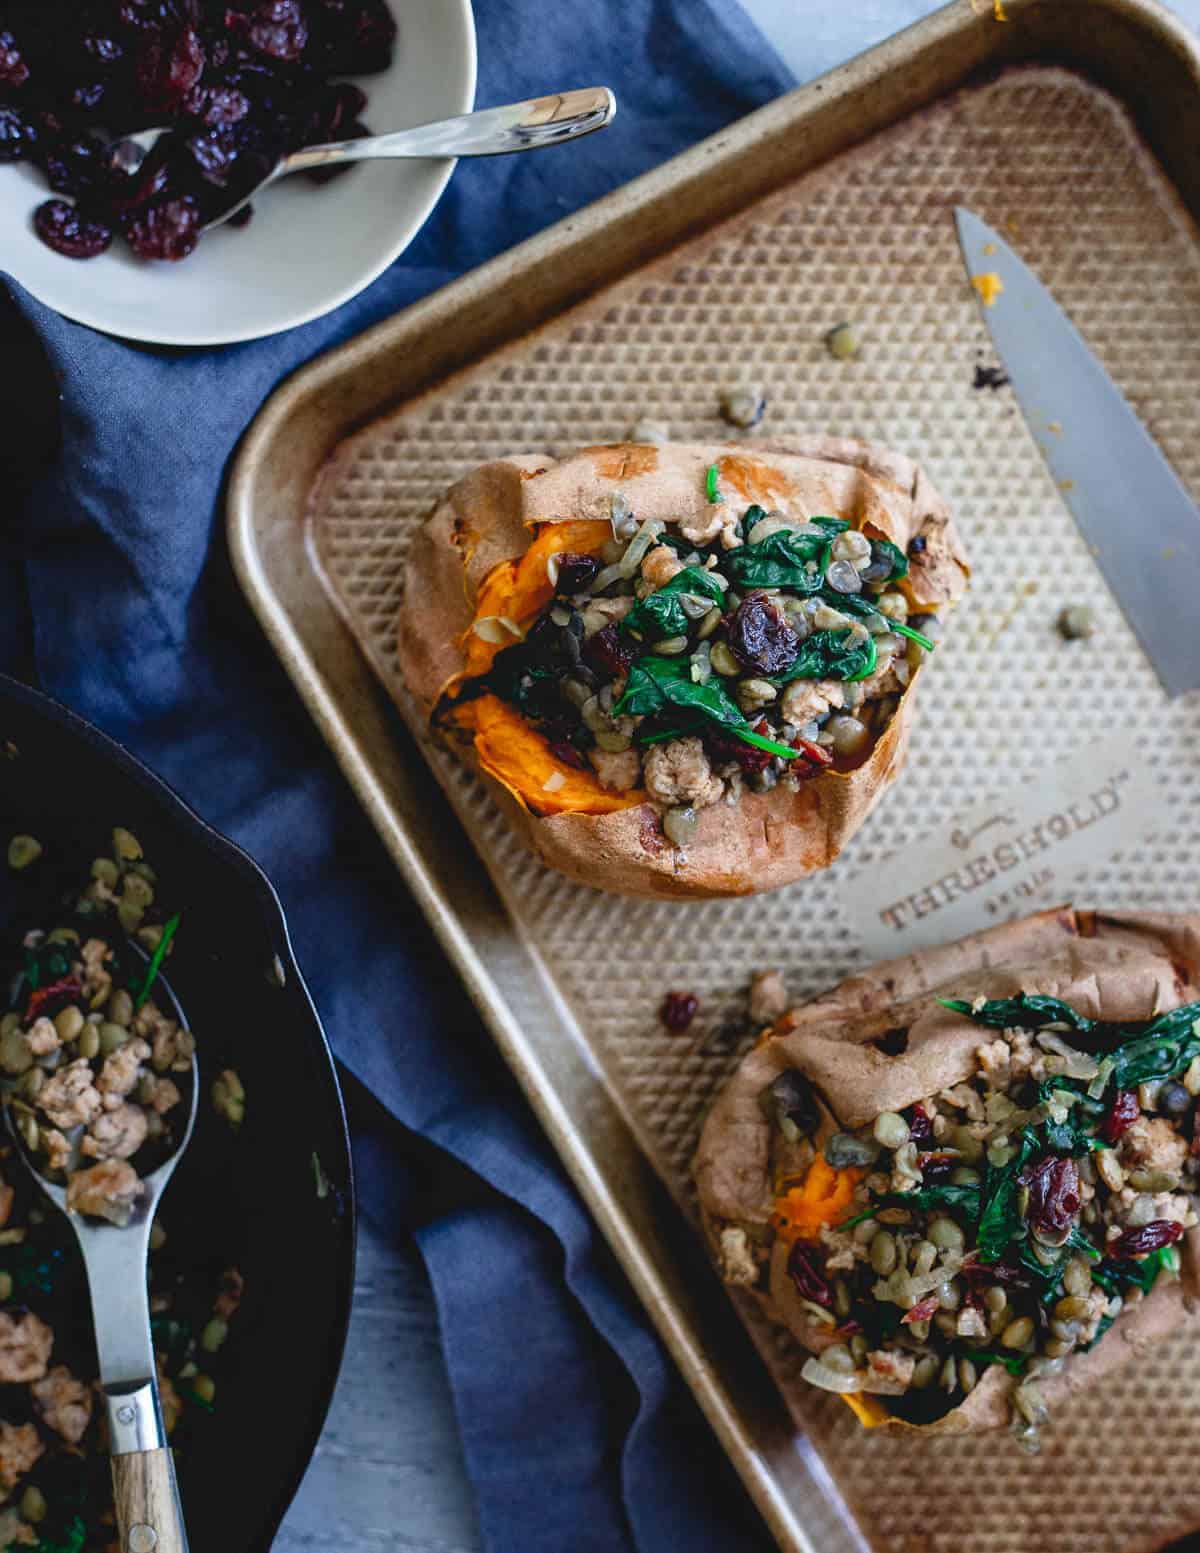 These stuffed sweet potatoes are filled with hot Italian turkey sausage, lentils, tart cherries and spinach. A wholesome way to welcome in the fall season.